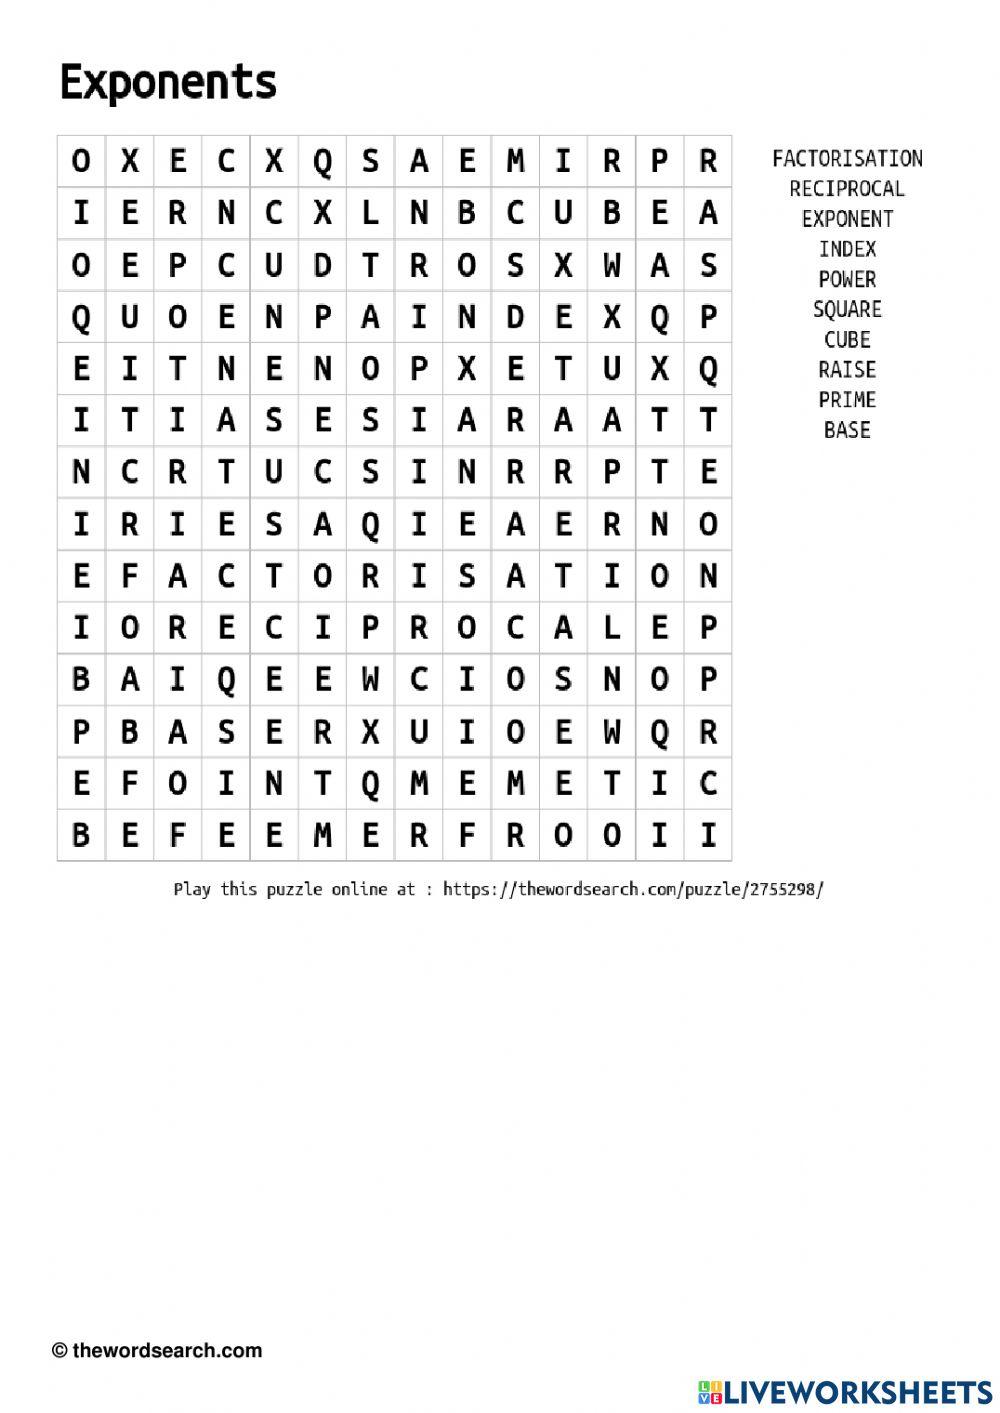 Exponents wordsearch